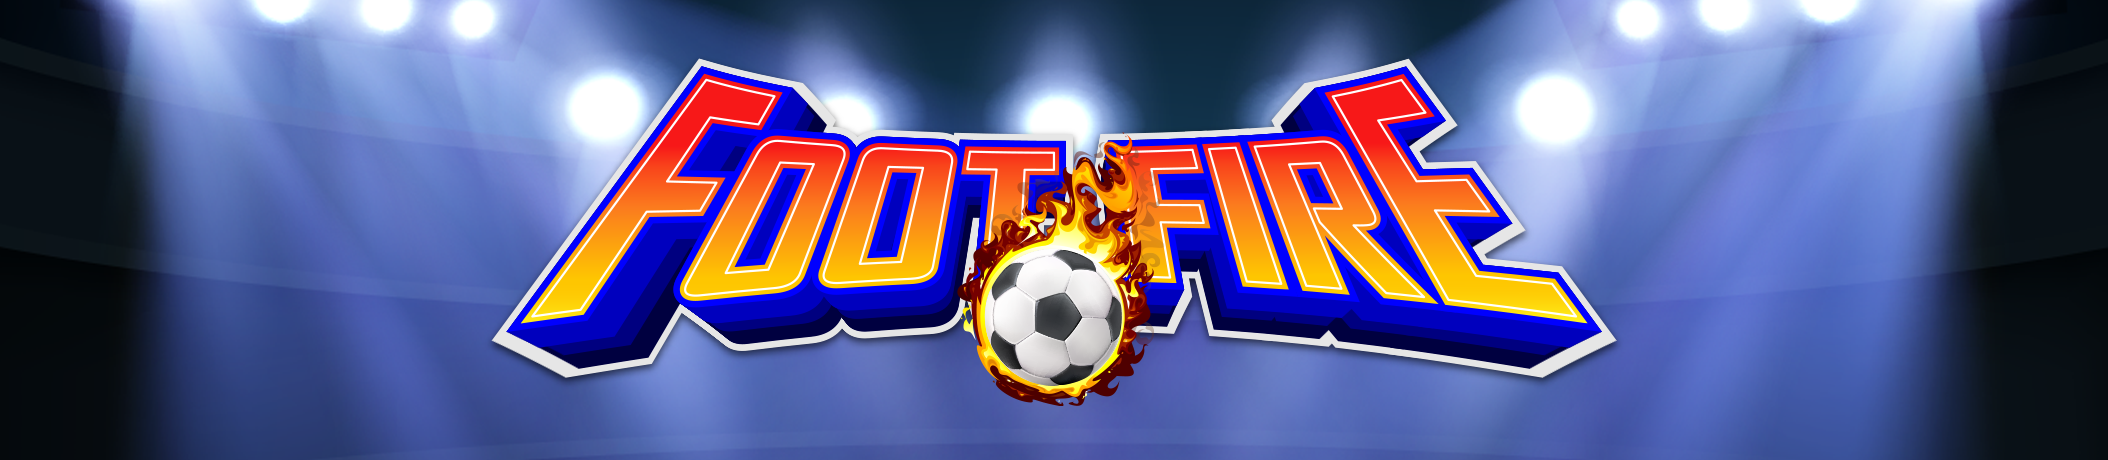 Foot Fire - Idle RPG With Soccer Elements